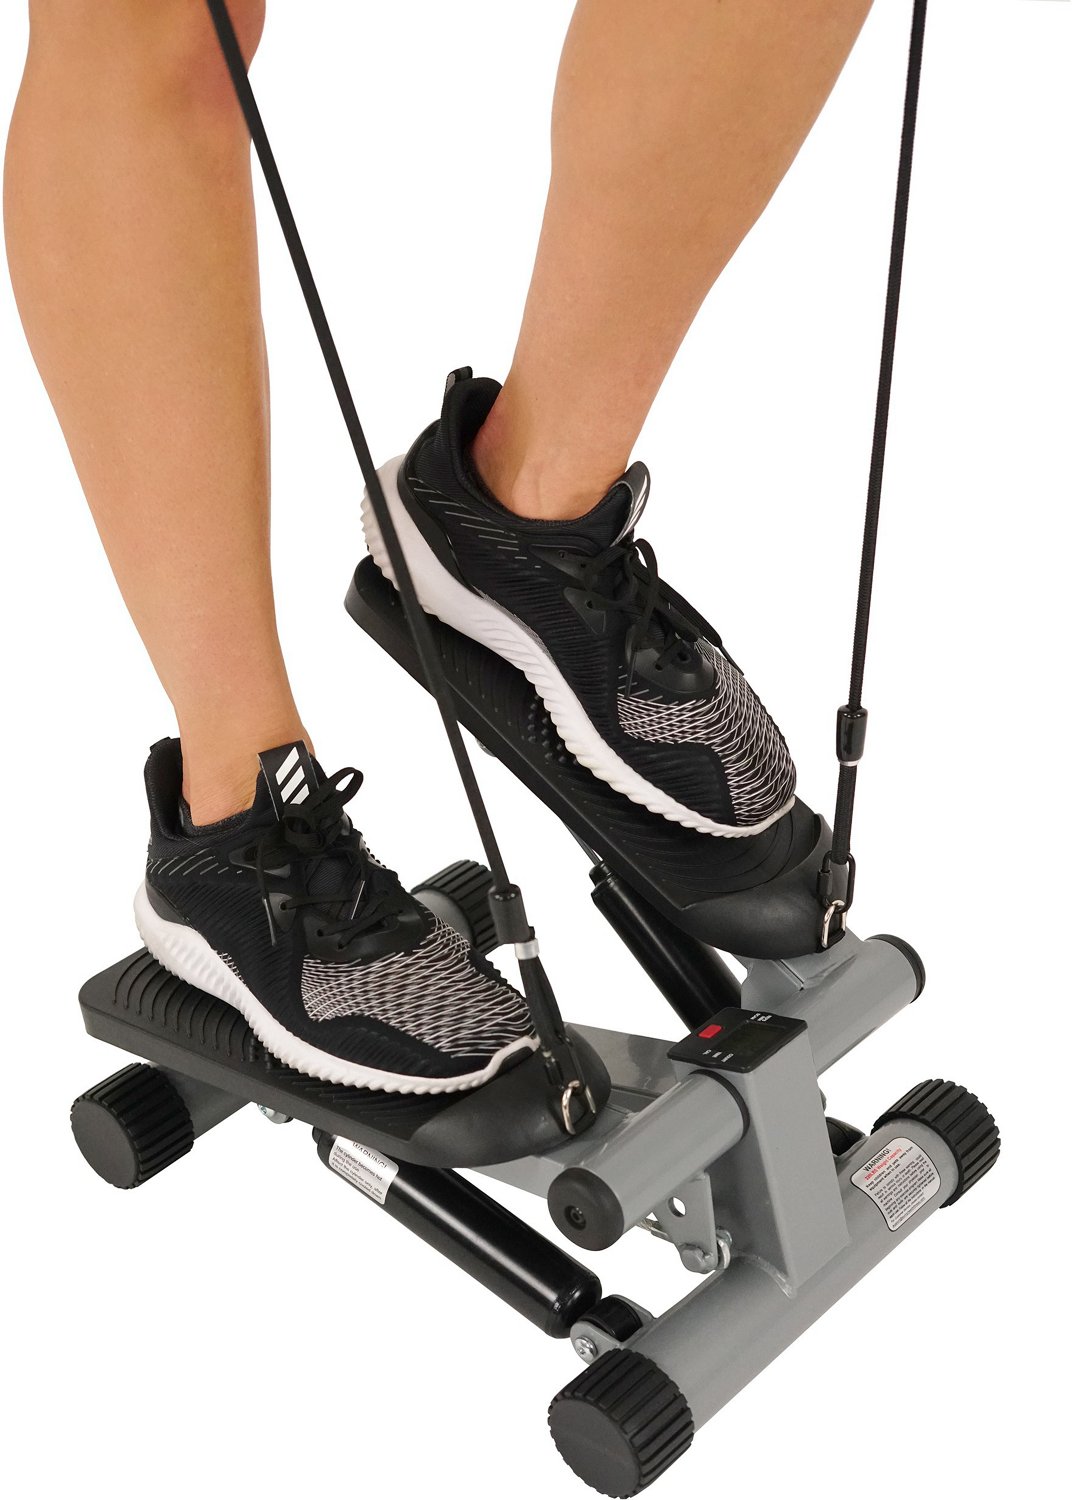 Sunny Health & Fitness Mini Stepper with Bands